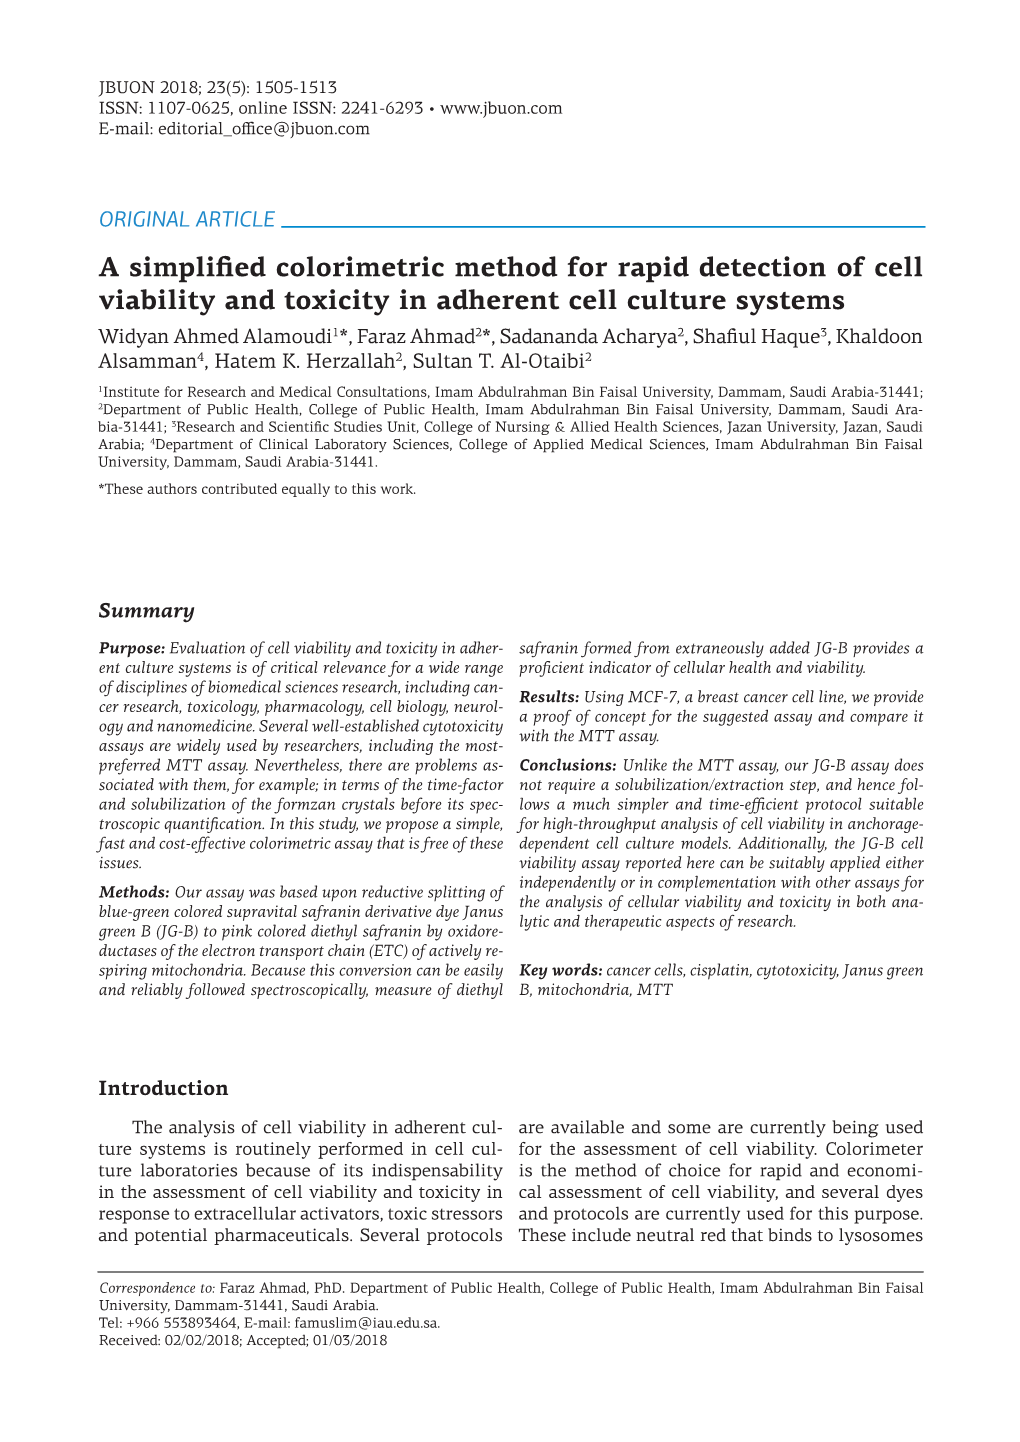 A Simplified Colorimetric Method for Rapid Detection of Cell Viability and Toxicity in Adherent Cell Culture Systems